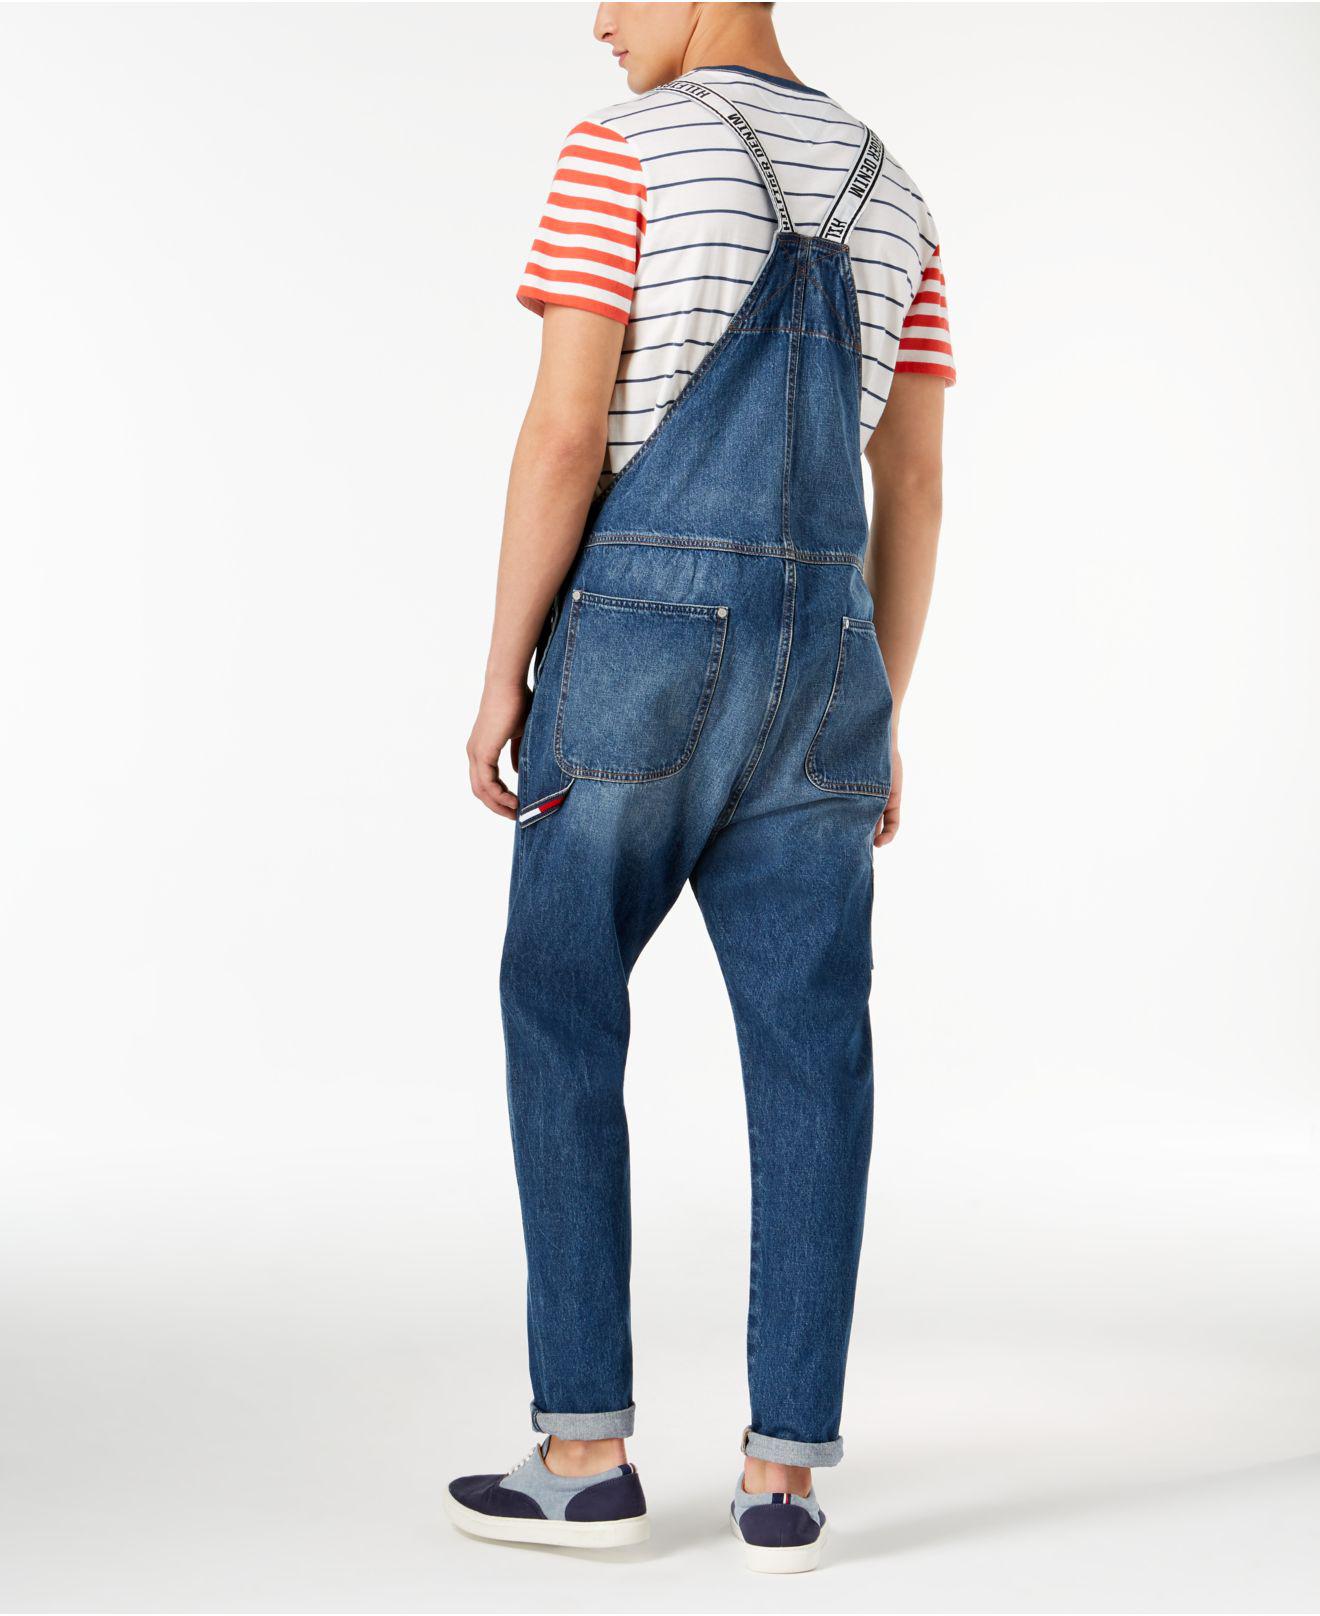 Tommy Hilfiger Denim Overalls in for | Lyst